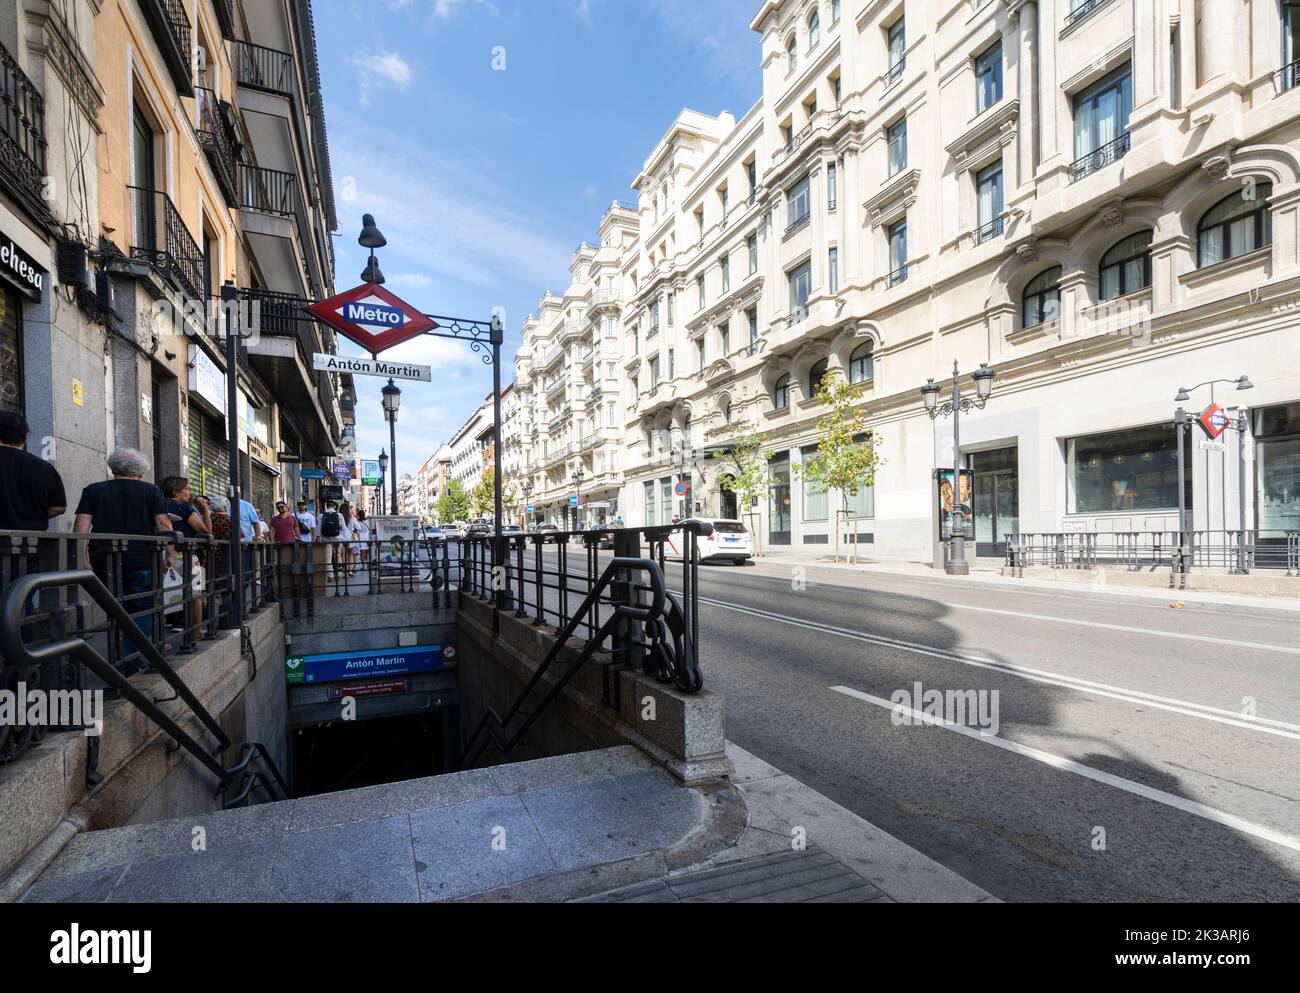 Madrid, Spain, September 2022. A view of the entr ance of Anton Martin Metro station in the city center Stock Photo